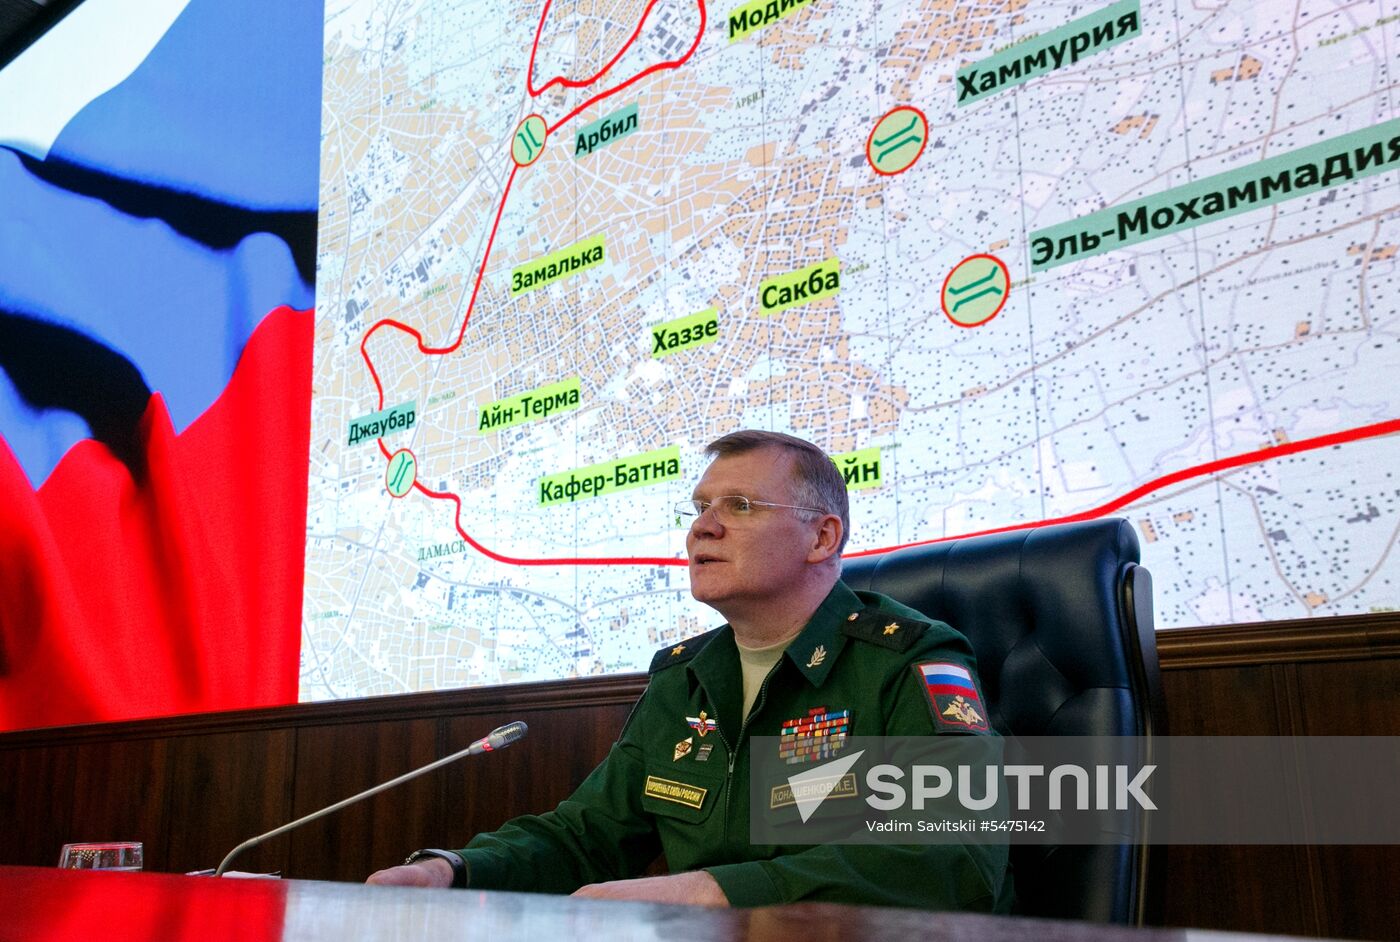 Defense Ministry's briefing on situation in Syria